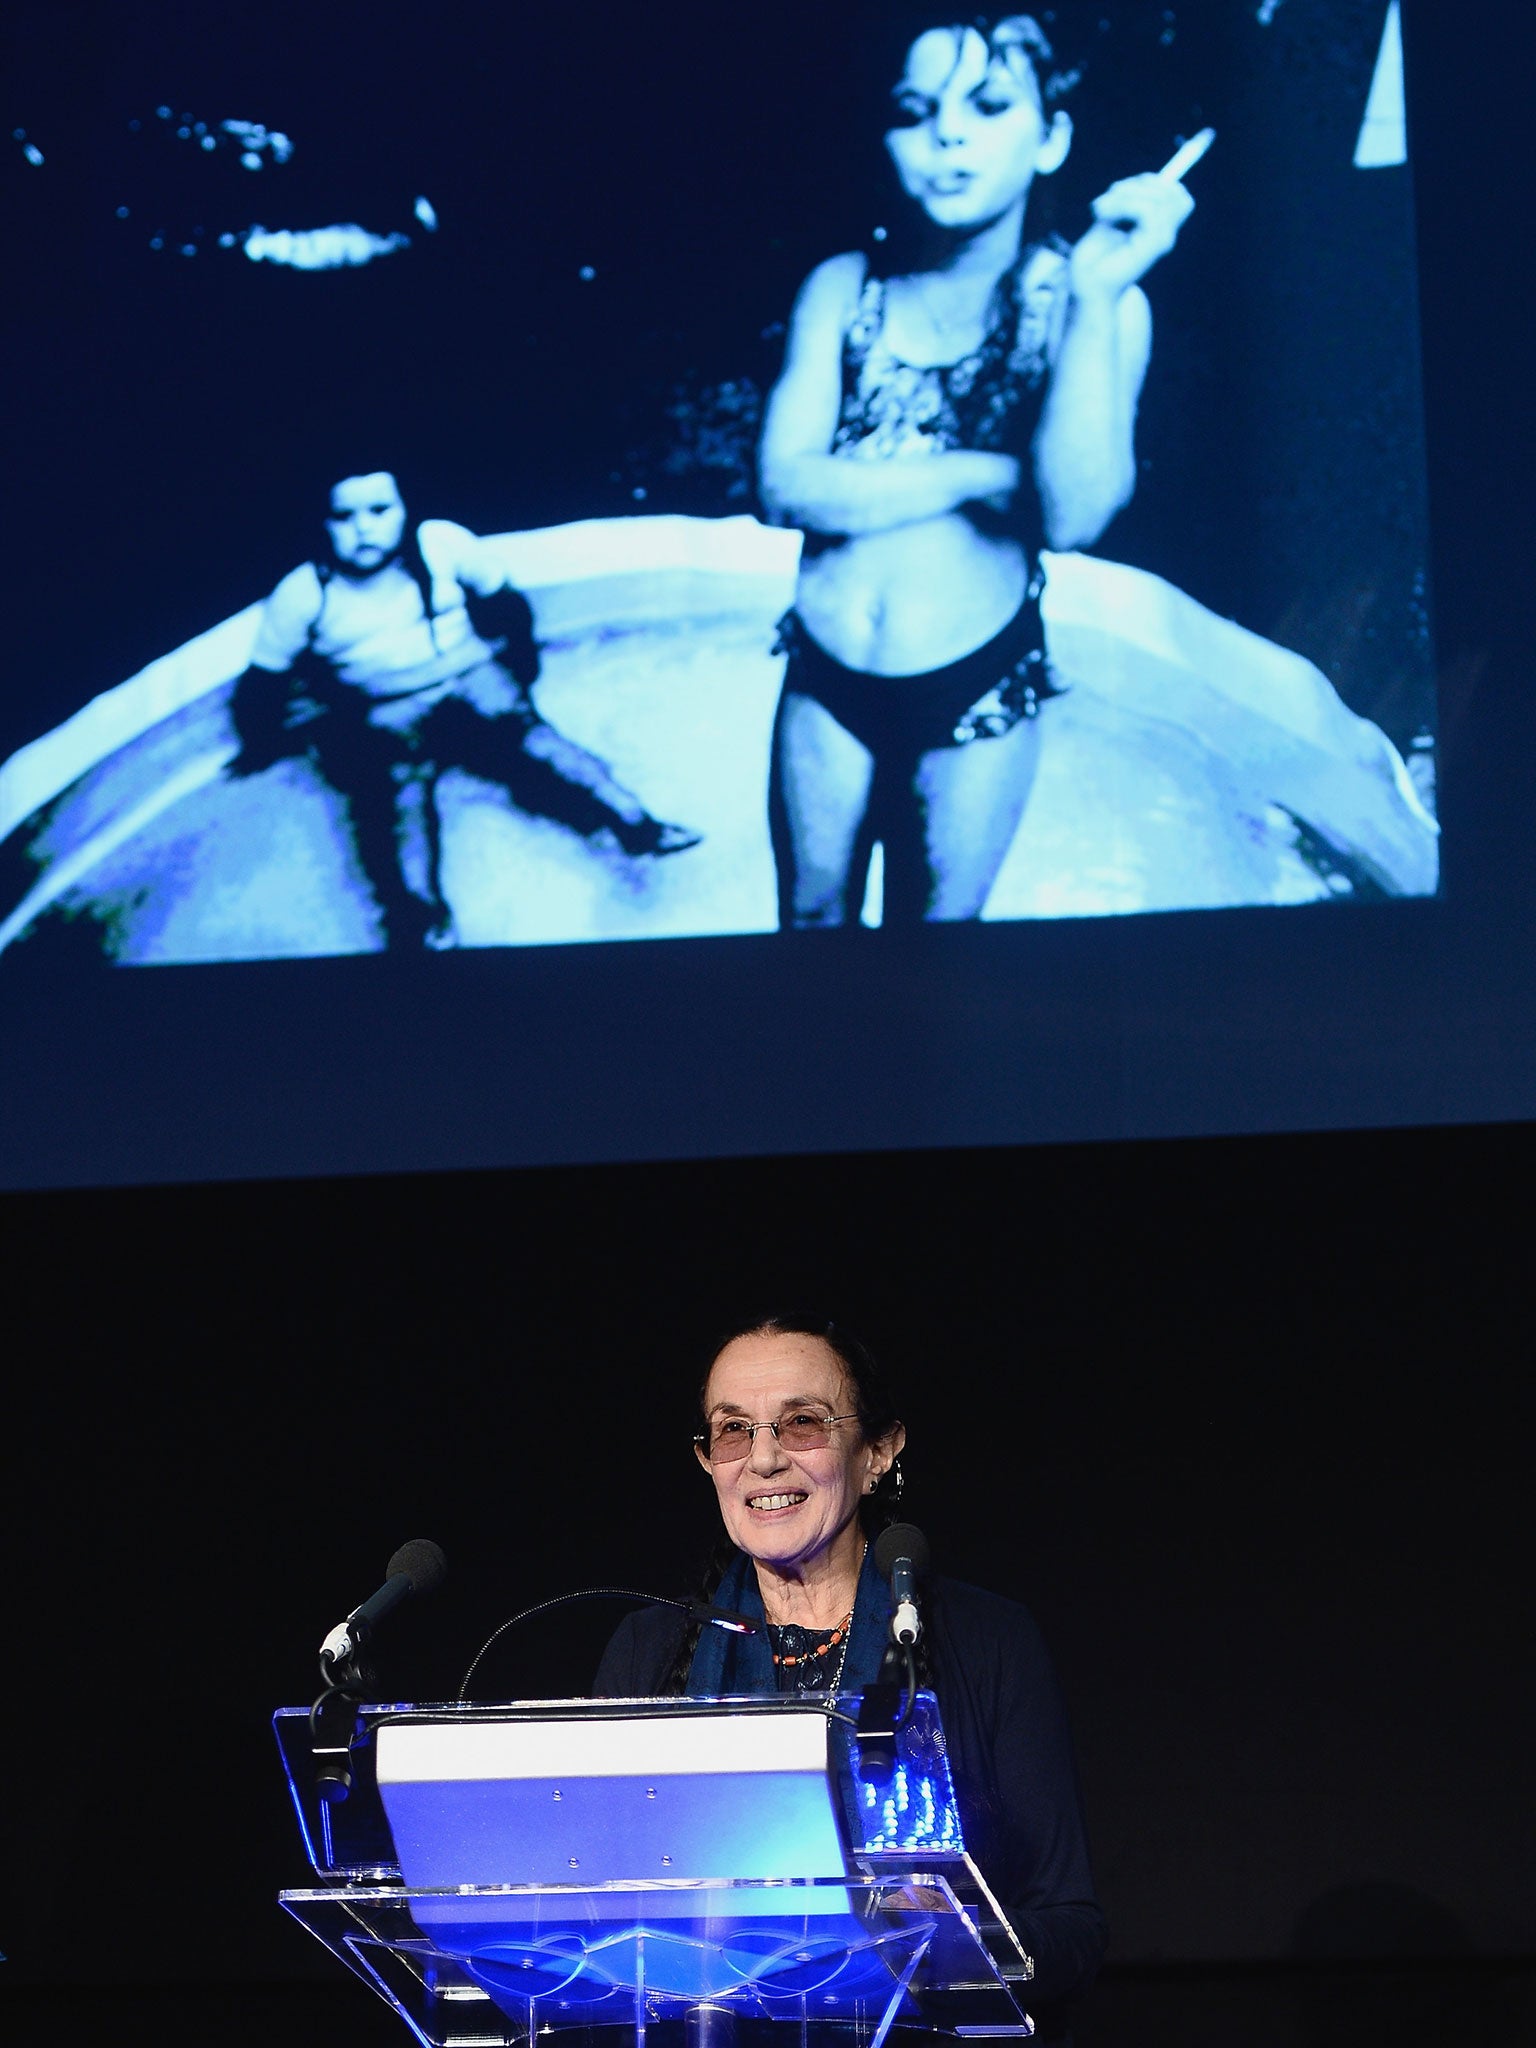 Mary Ellen Mark, winner of the Outstanding Contribution to Photography award on stage at the 2014 Sony World Photography awards (SWPA) at the London Hilton on April 30, 2014 in London